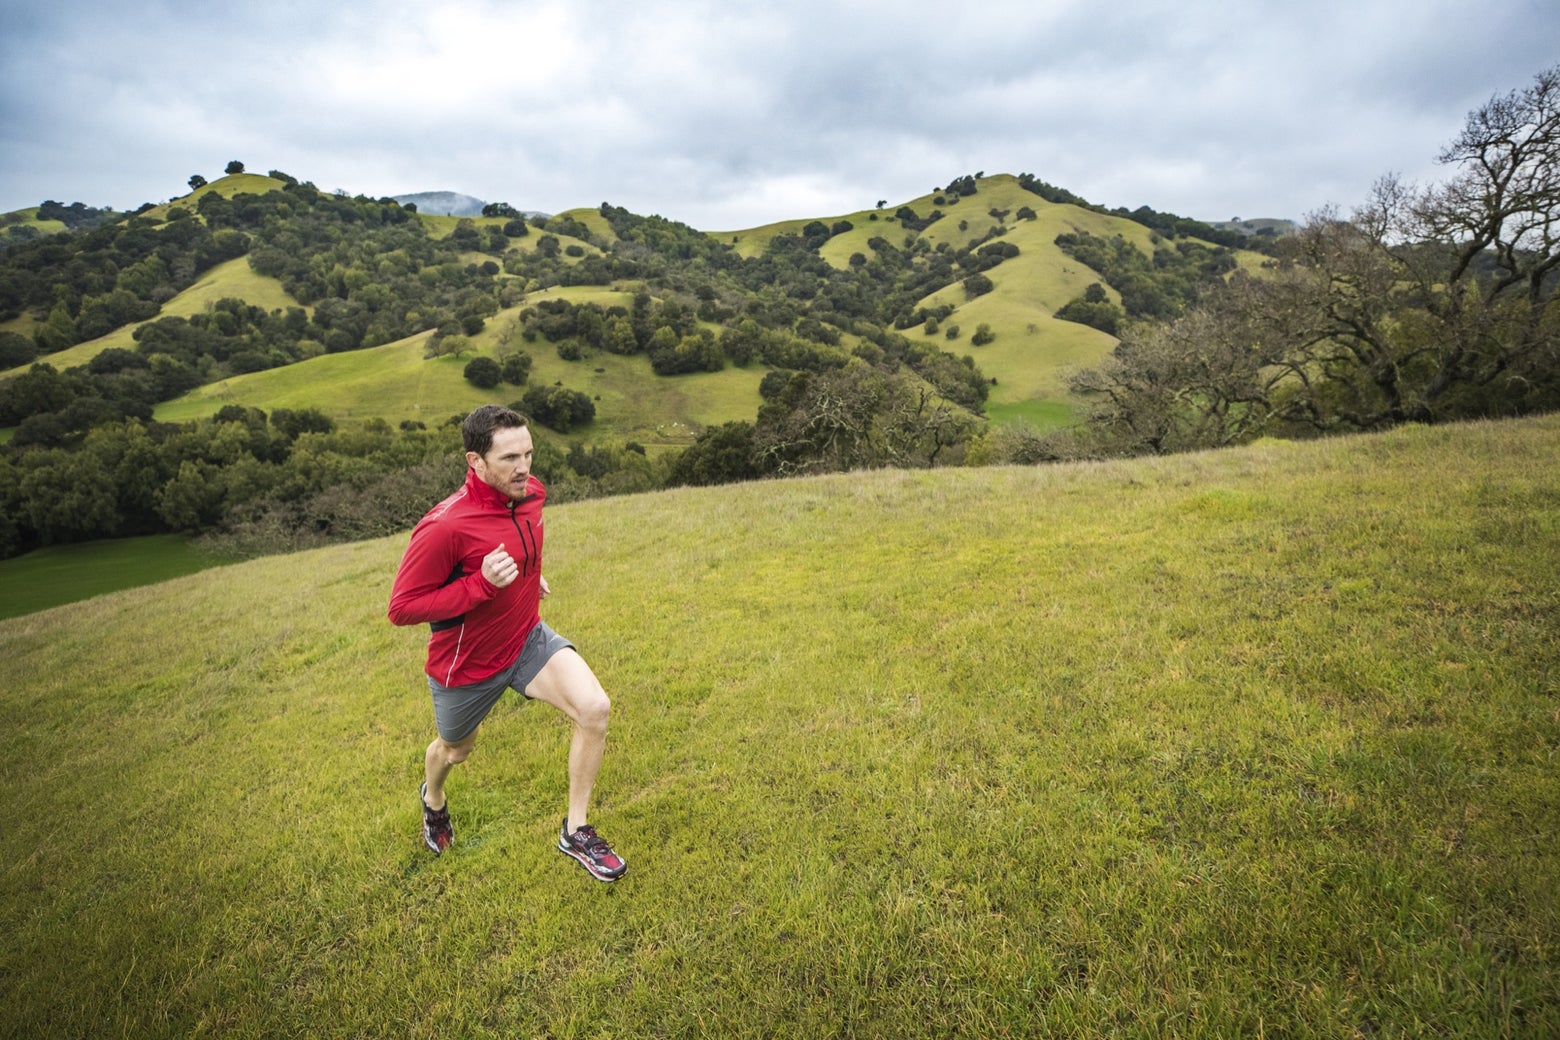 man running outside in a red jacket and gray shorts against the backdrop of green rolling hills